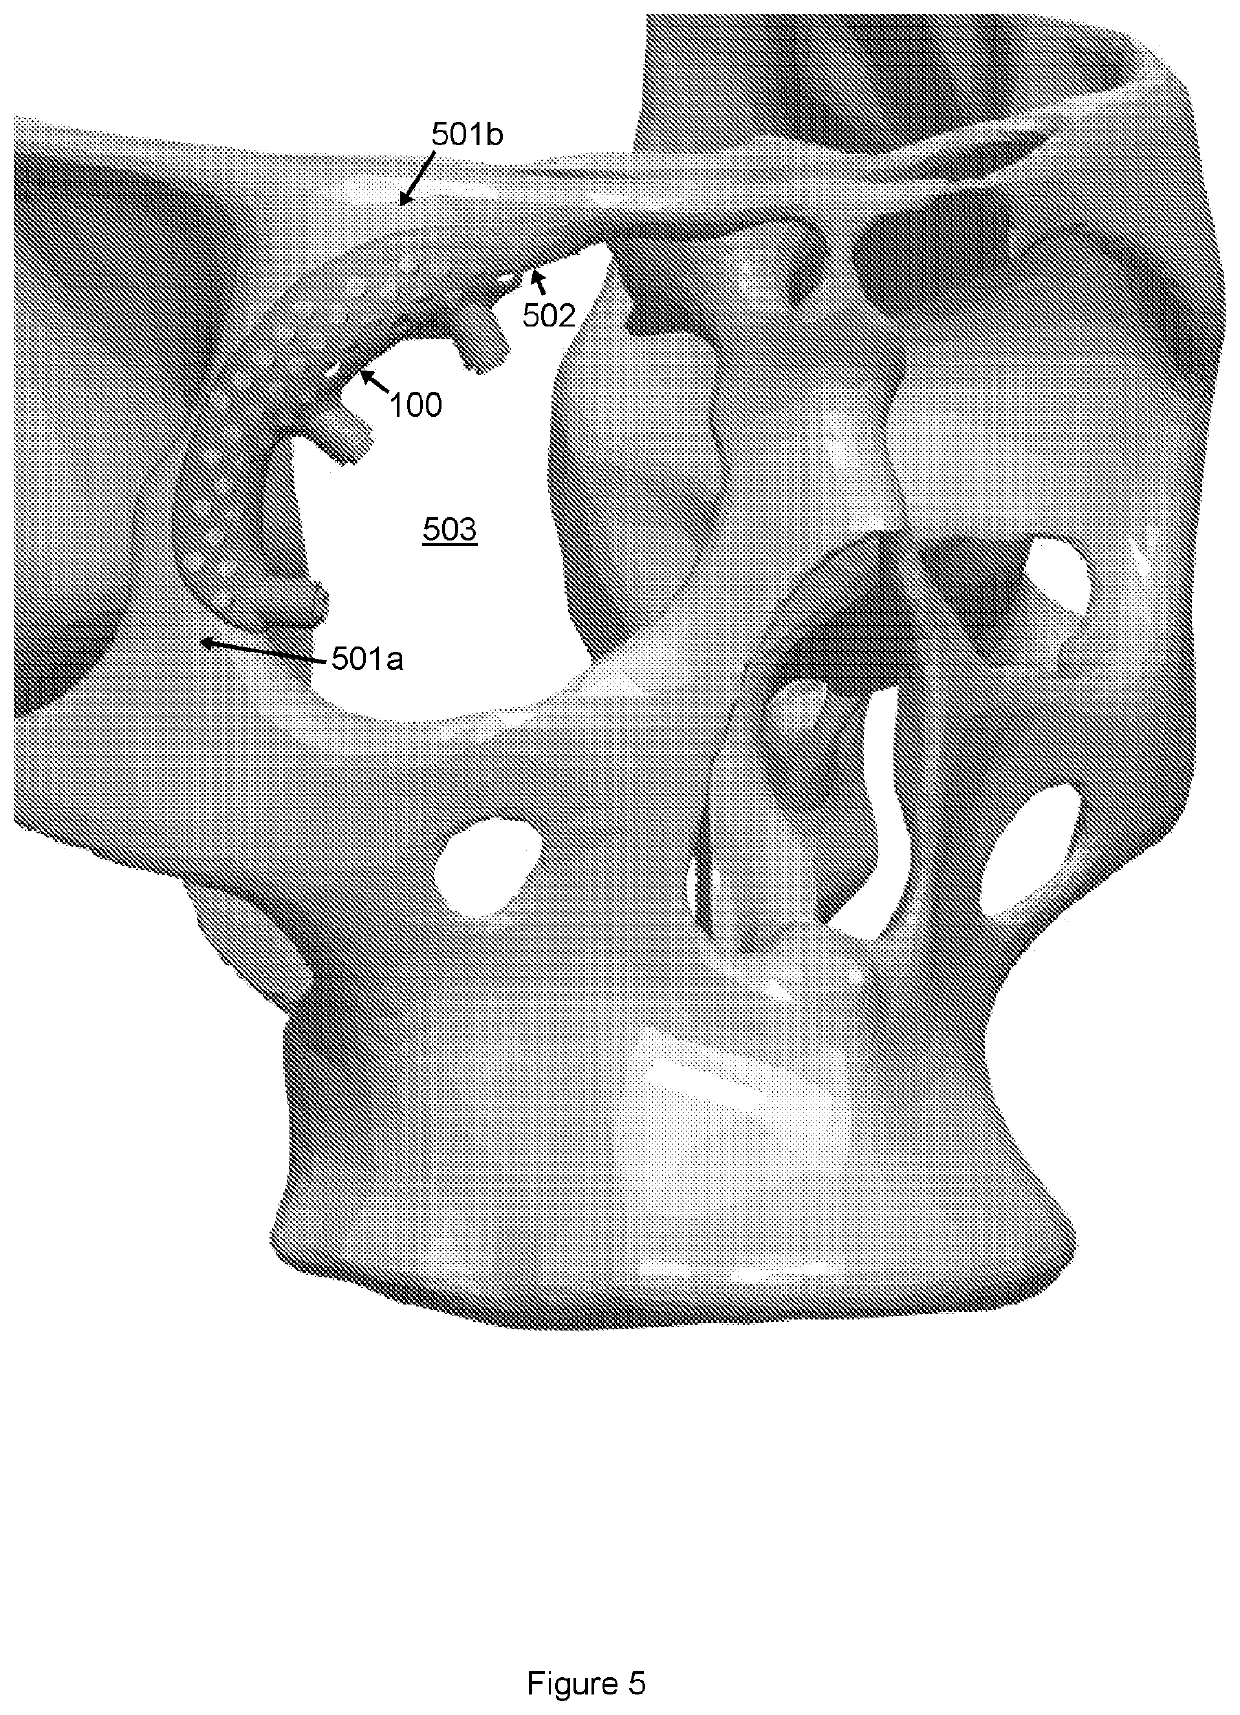 A procedure and orbital implant for orbit anchored bone affixation of an eye prosthesis